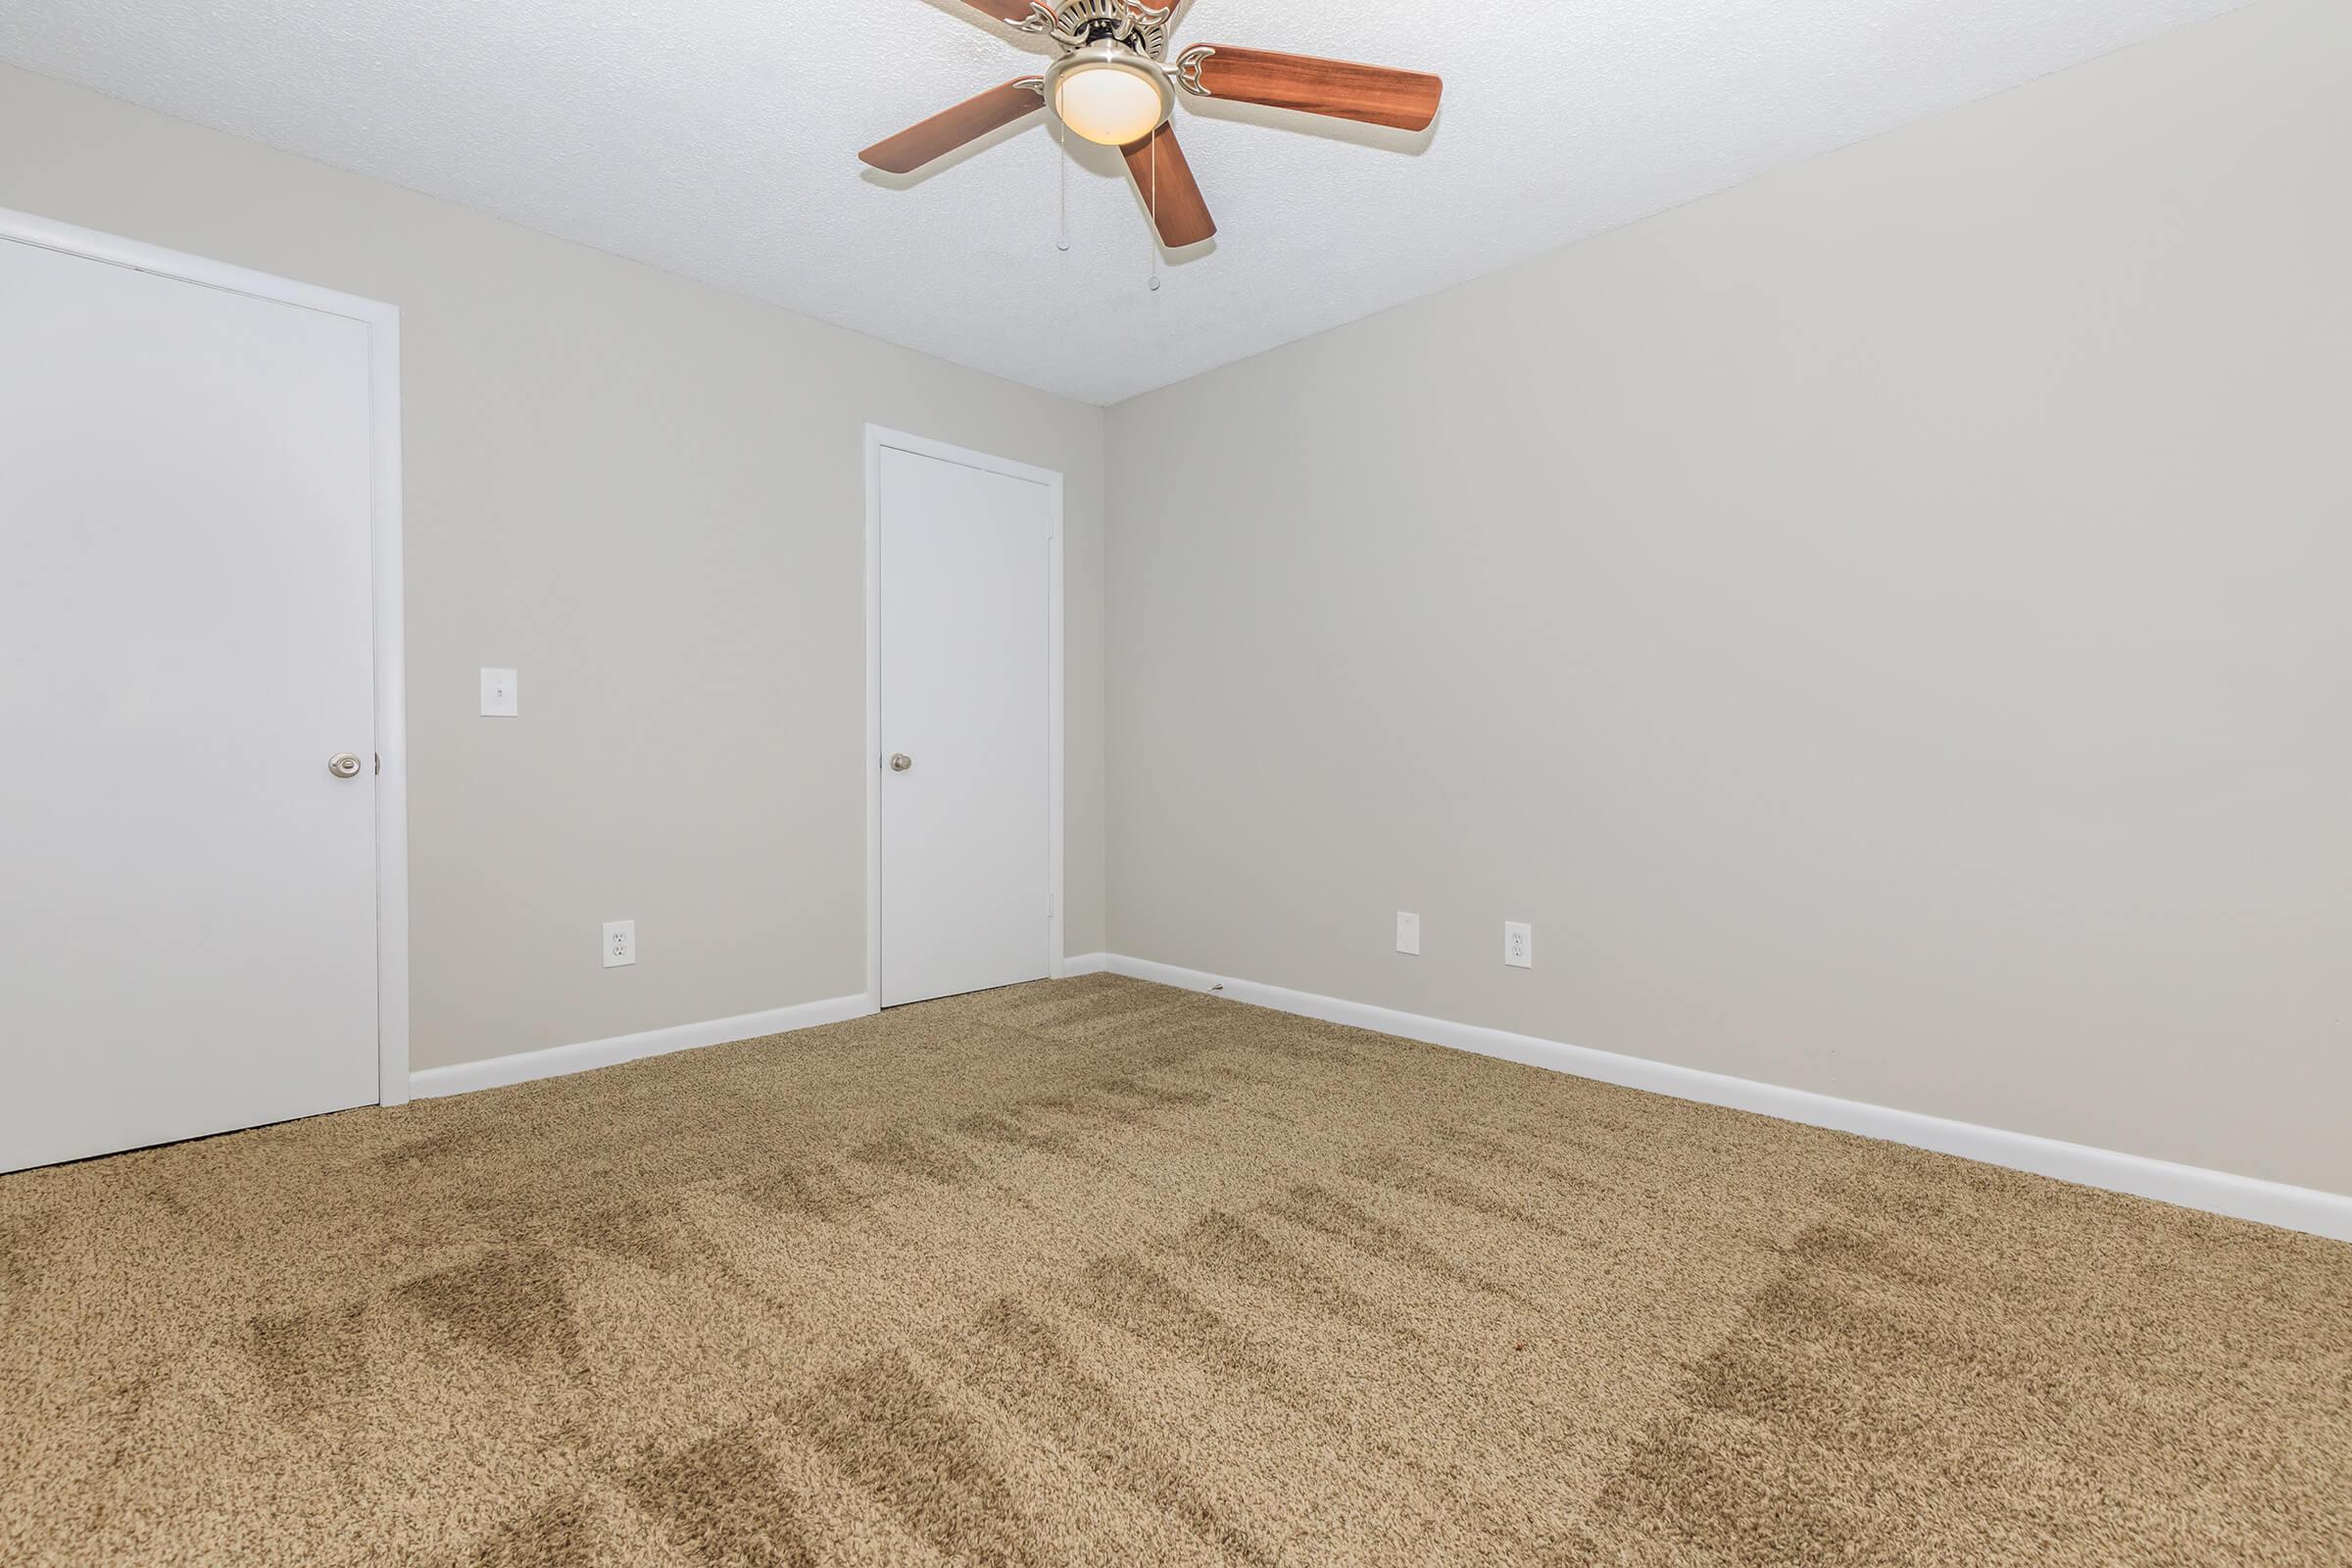 COMFORTABLE BEDROOM WITH PLUSH CARPETING